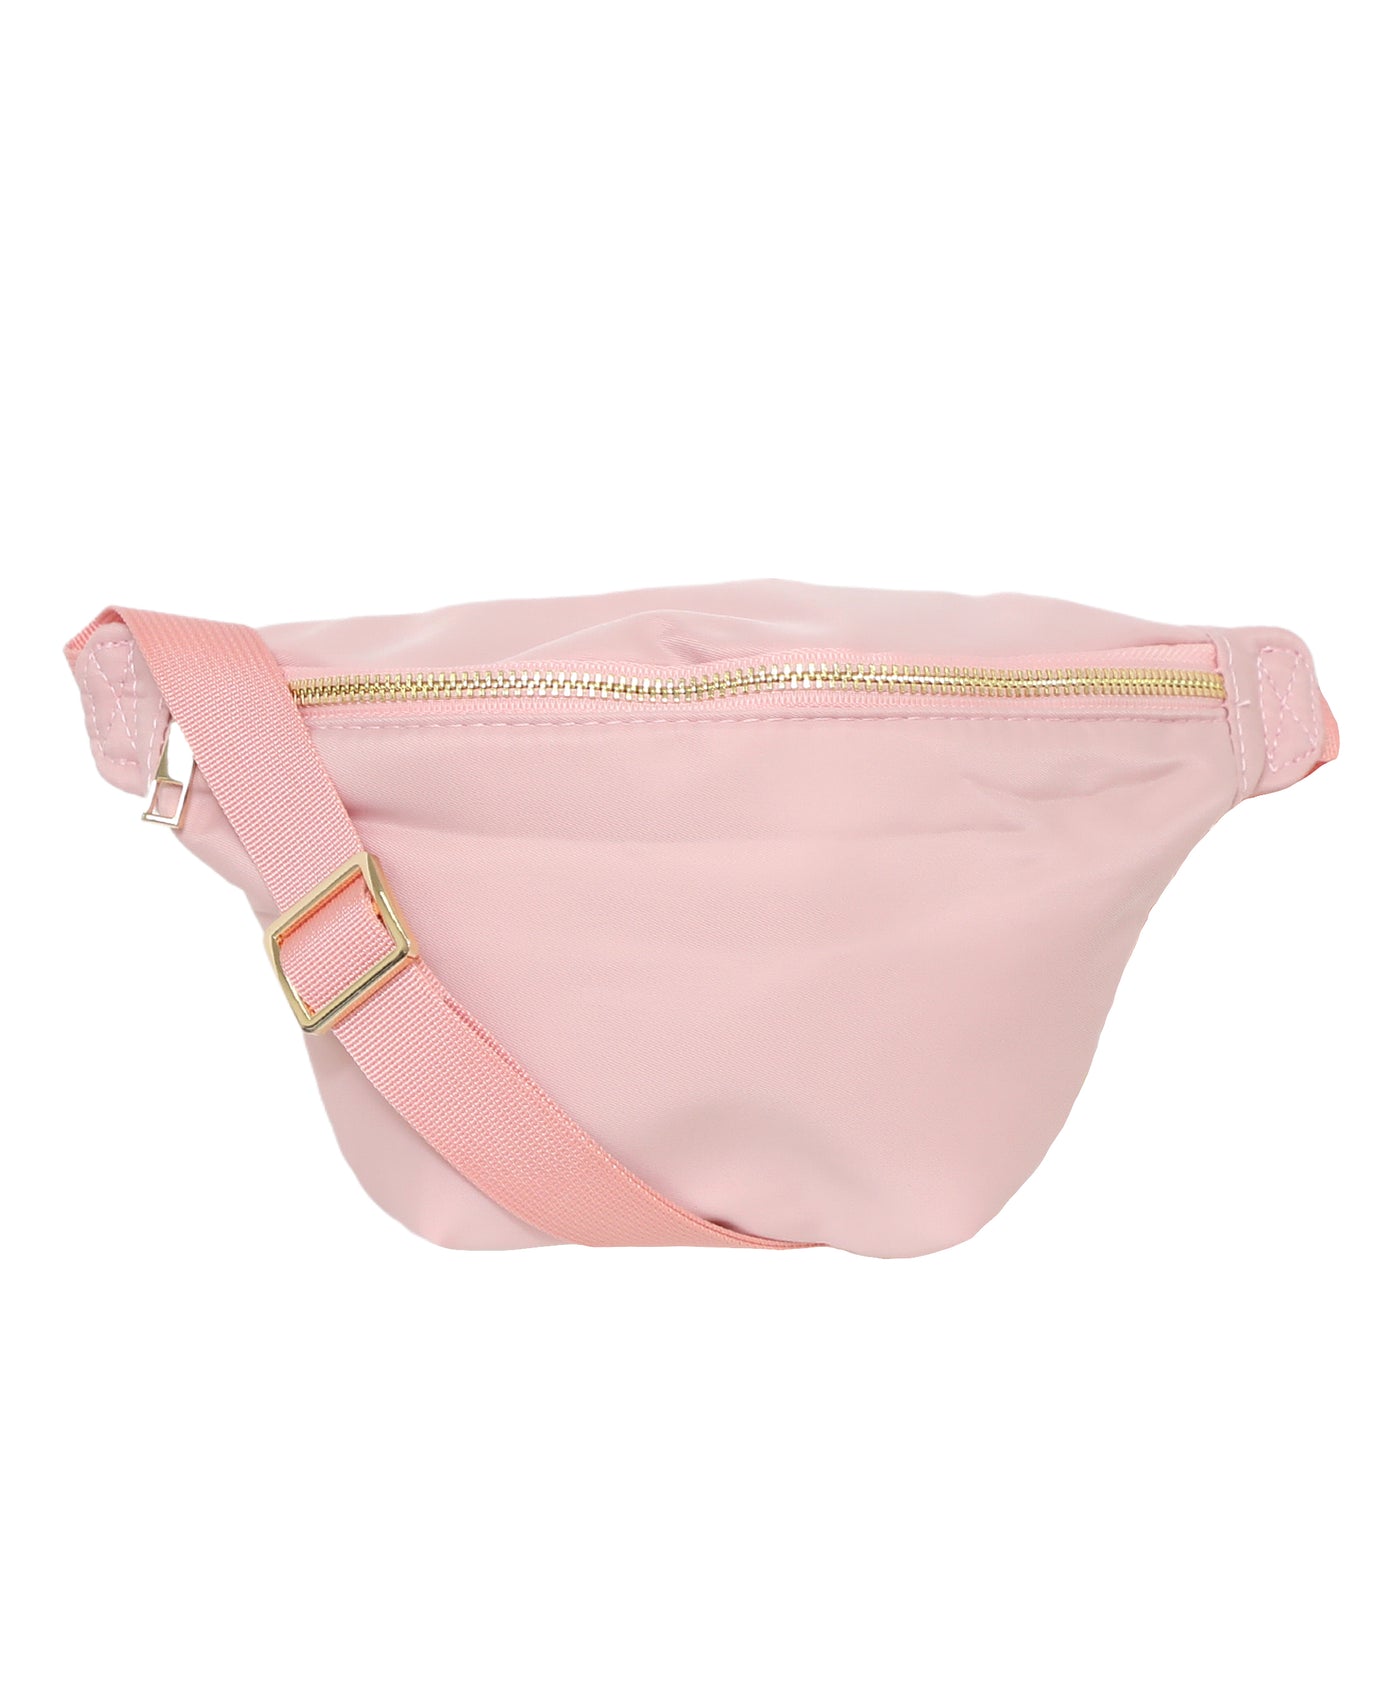 Dusty Rose Fanny Pack image 1